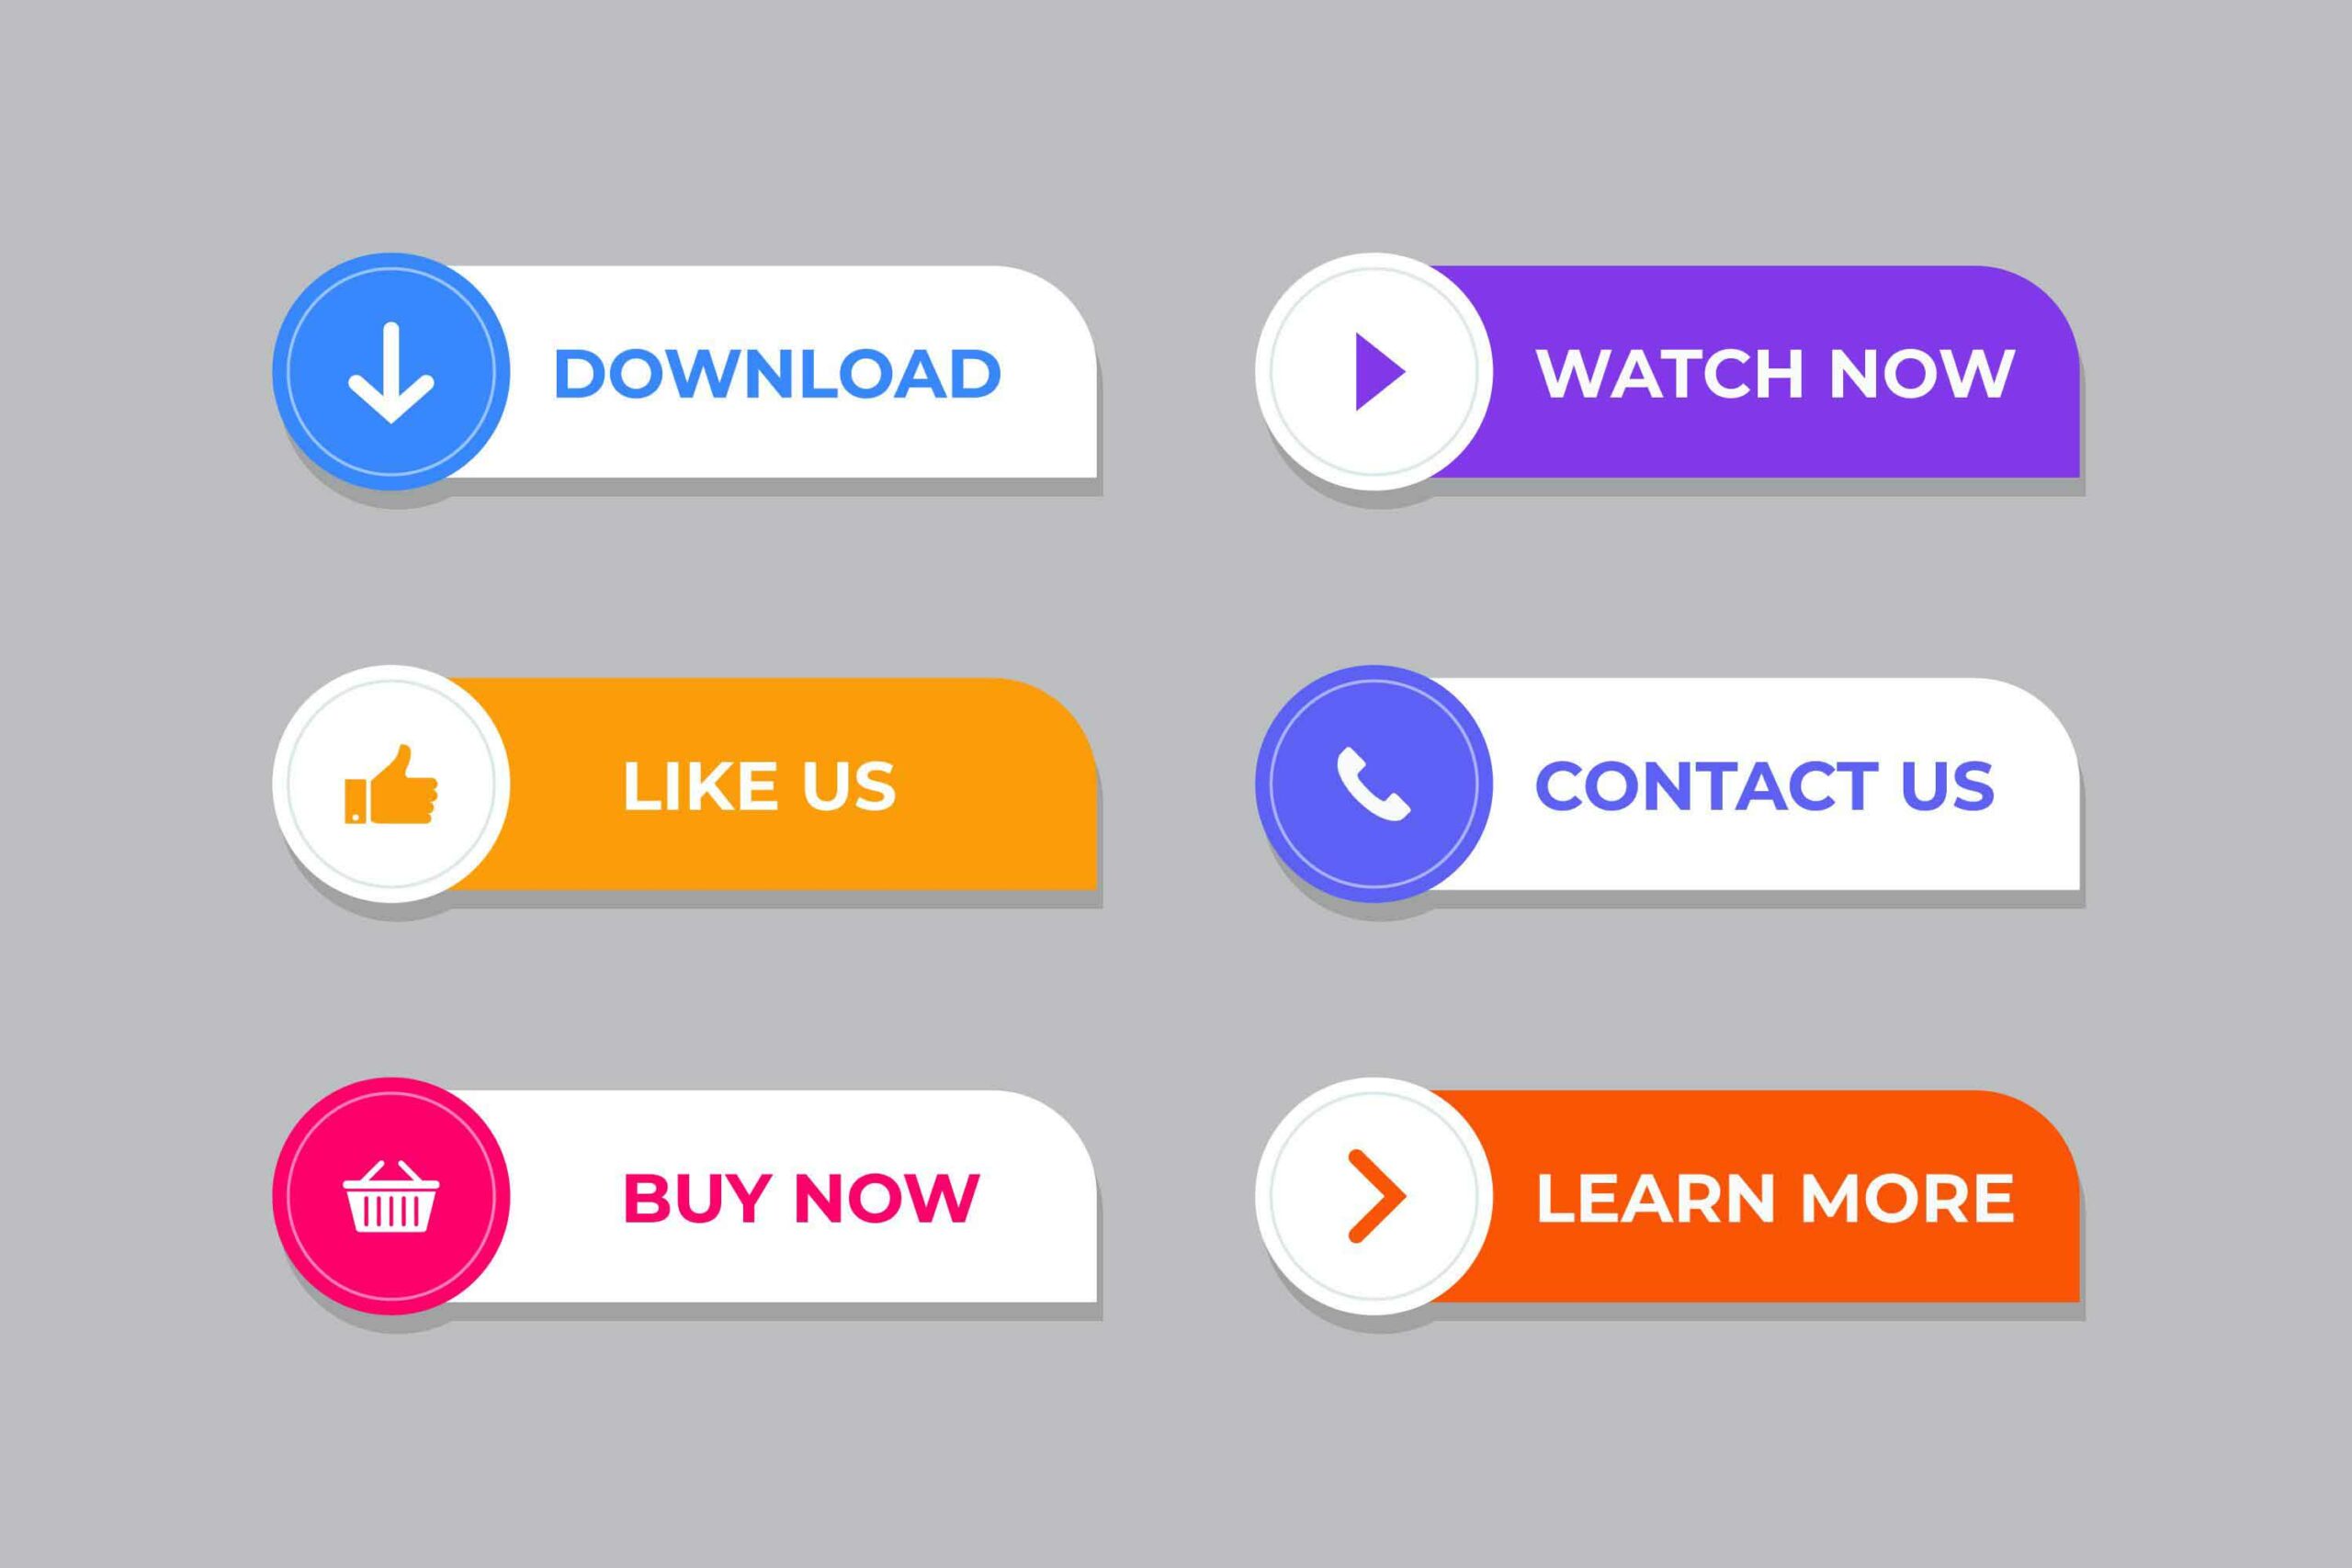 Implement Call-to-Action Buttons